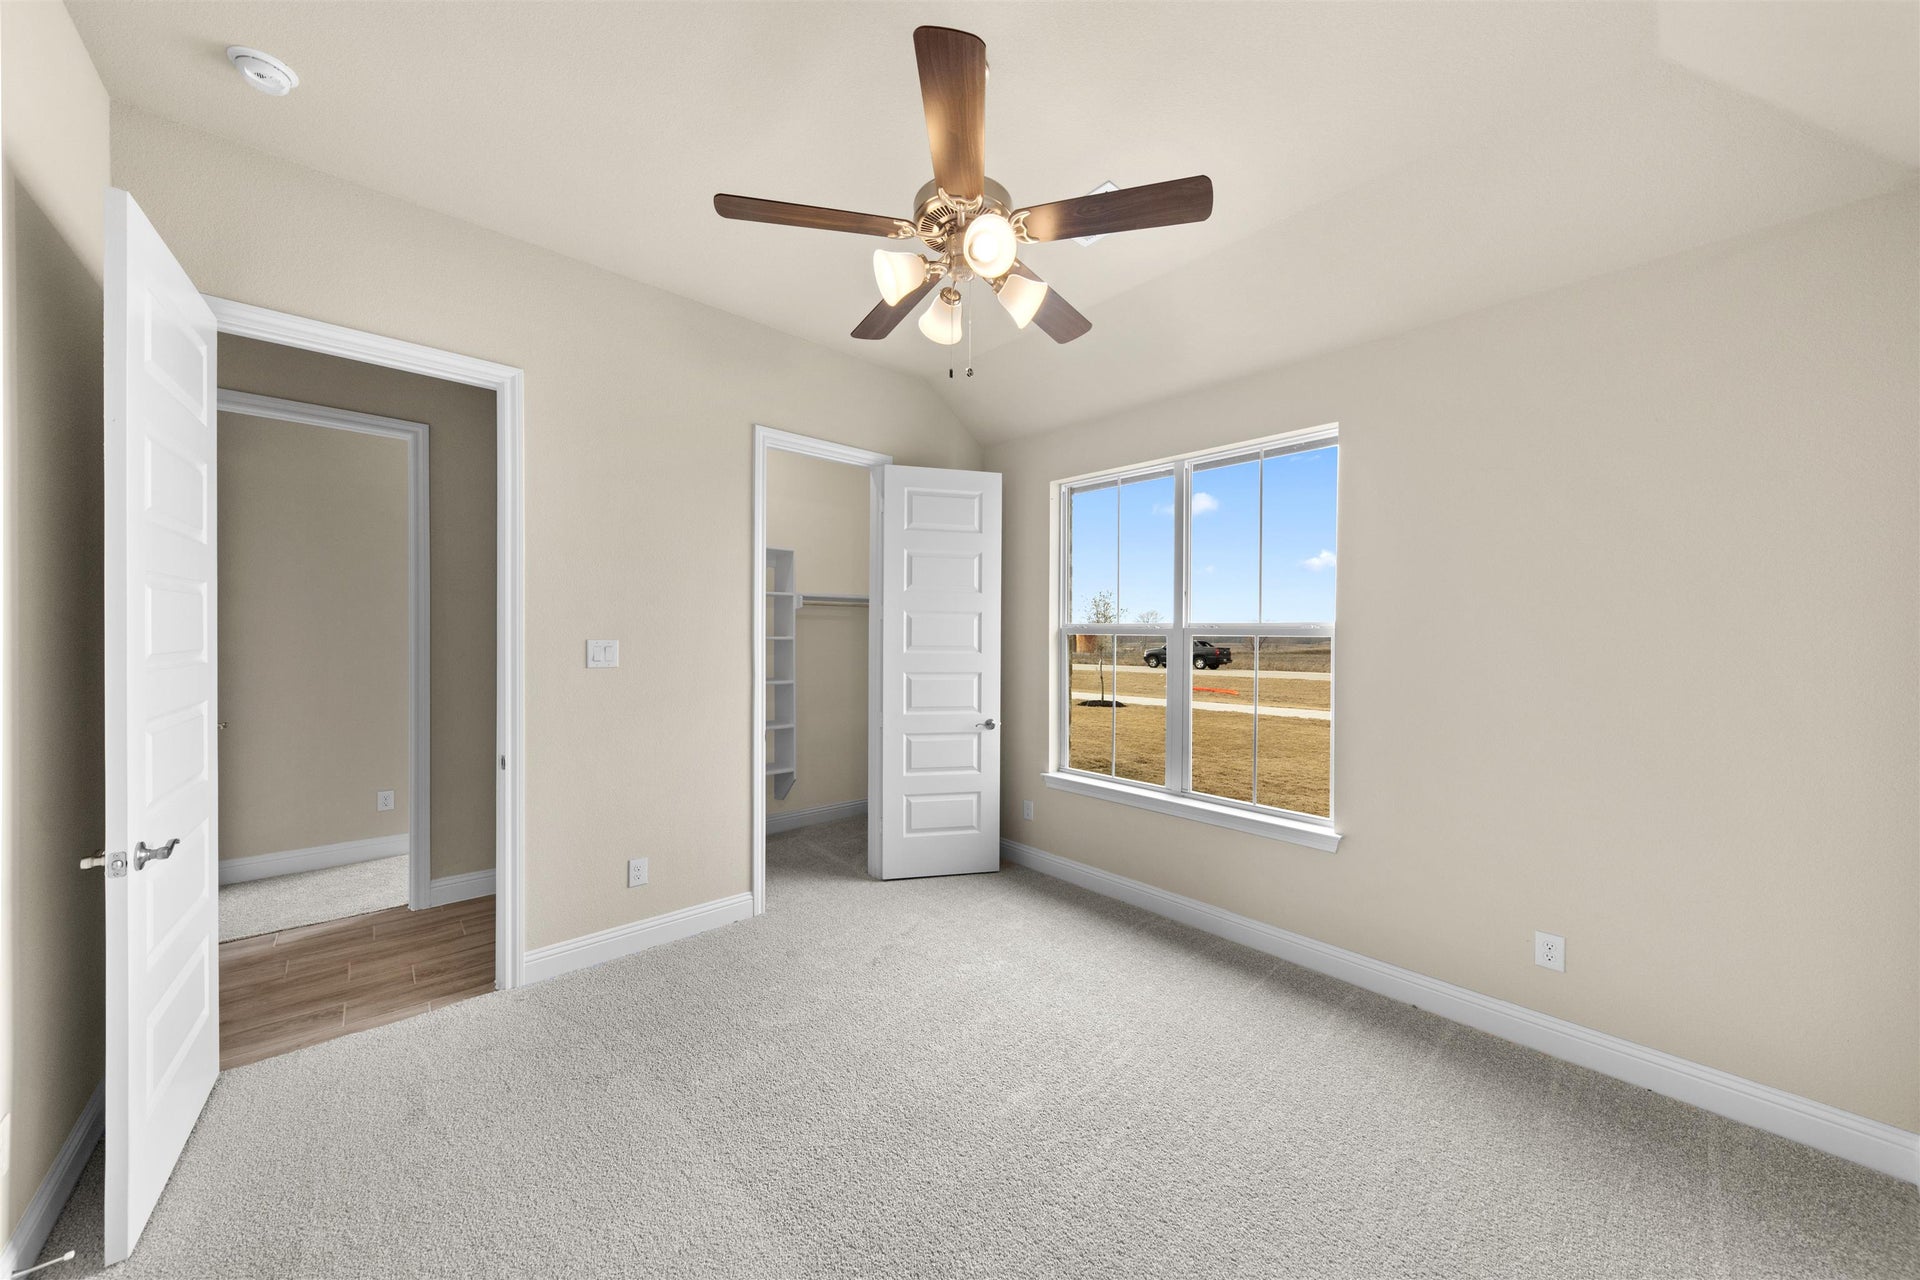 5br New Home in New Fairview, TX